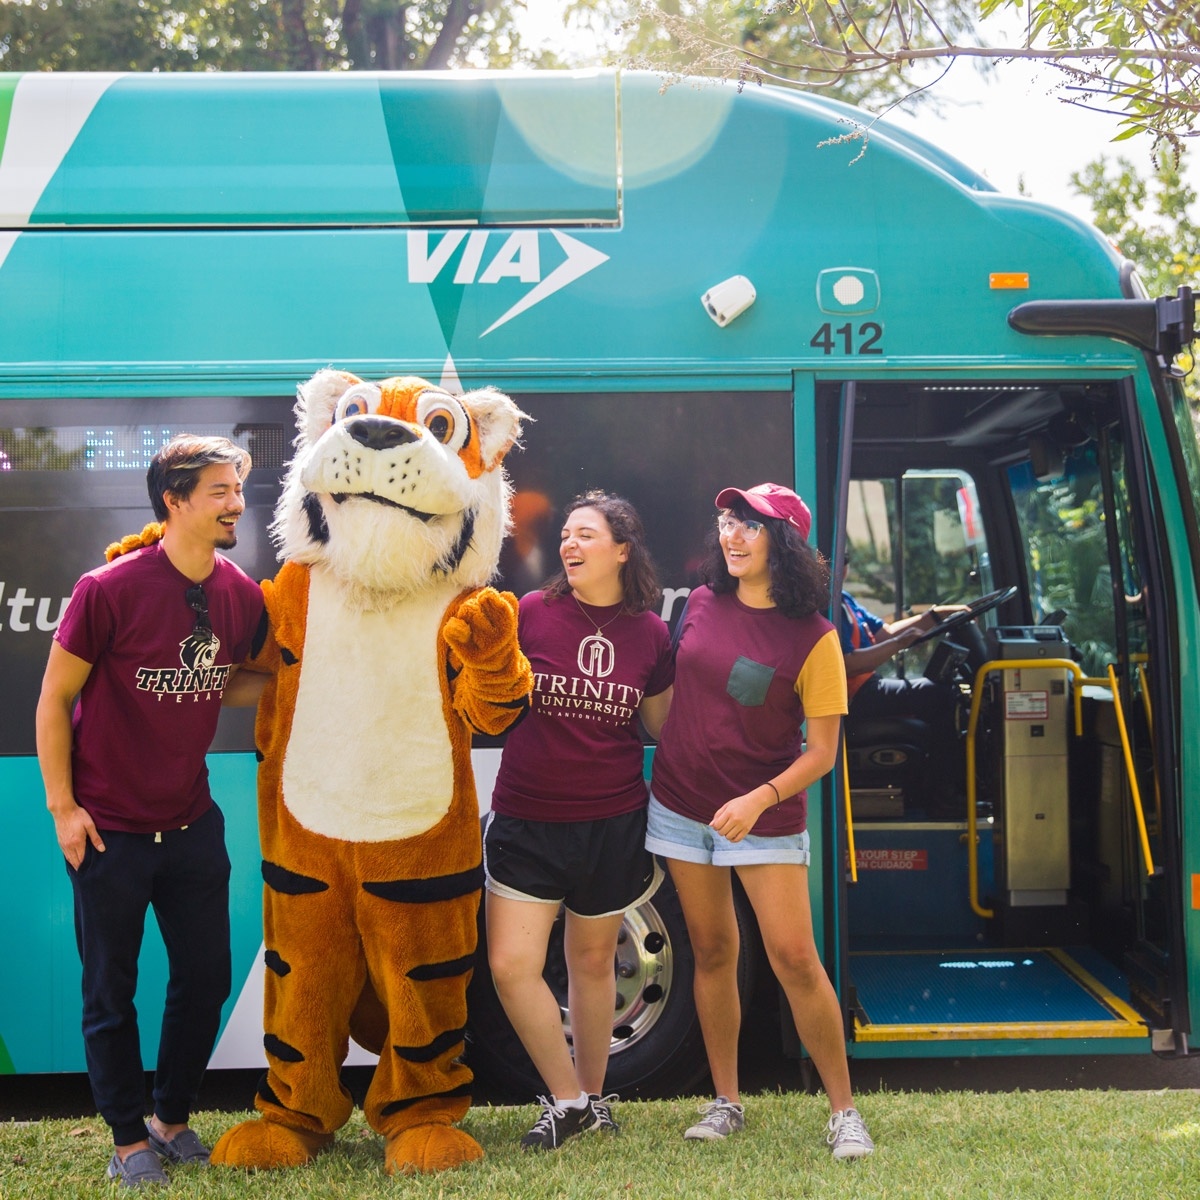 three students and the LeeRoy mascot stand in front of the VIVA culture bus